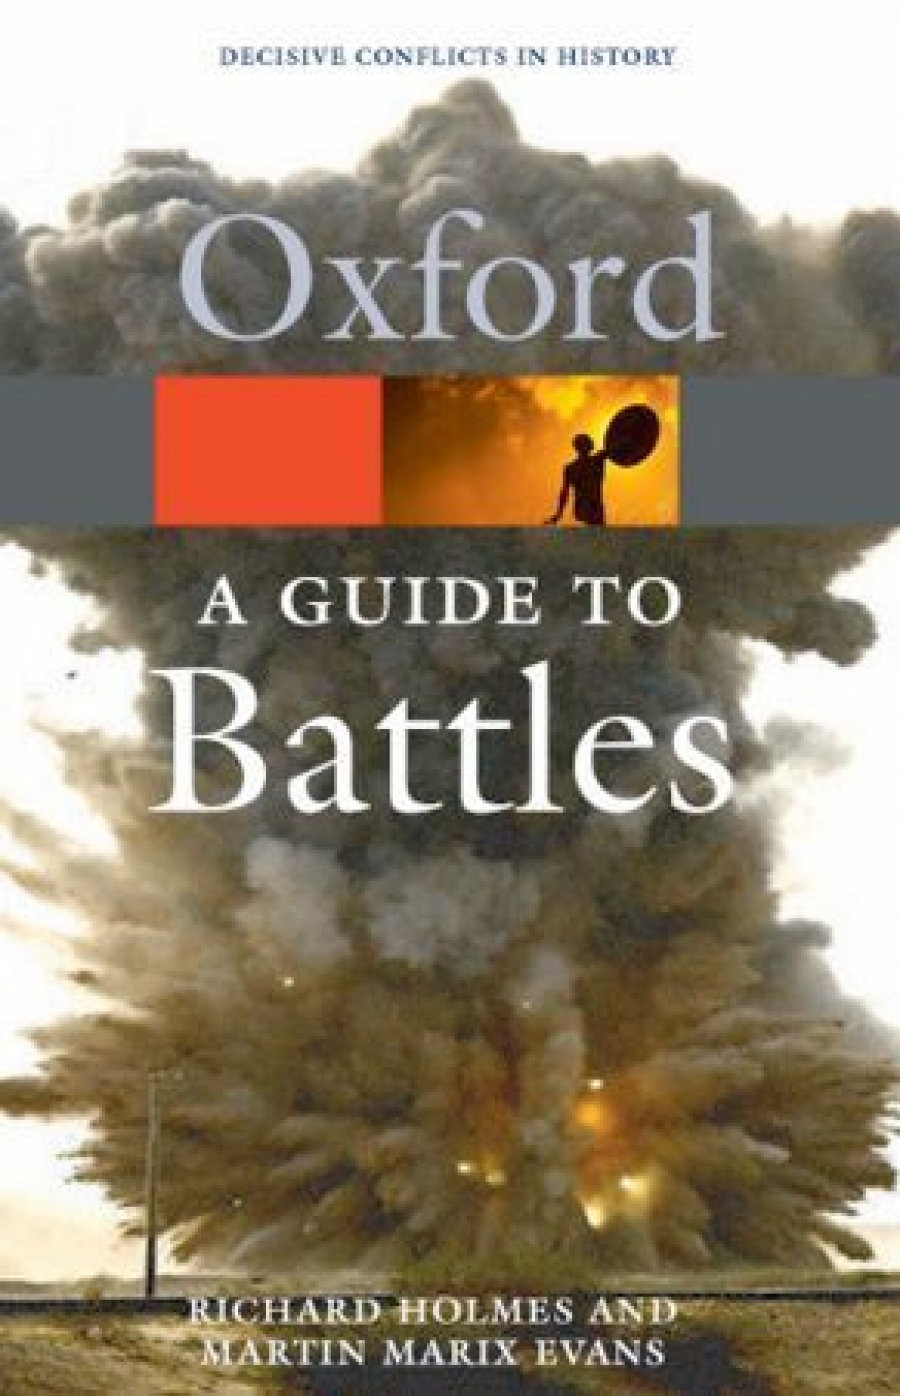 Richard Holmes A Guide to Battles: Decisive Conflicts in History (Oxford Paperback Reference) 